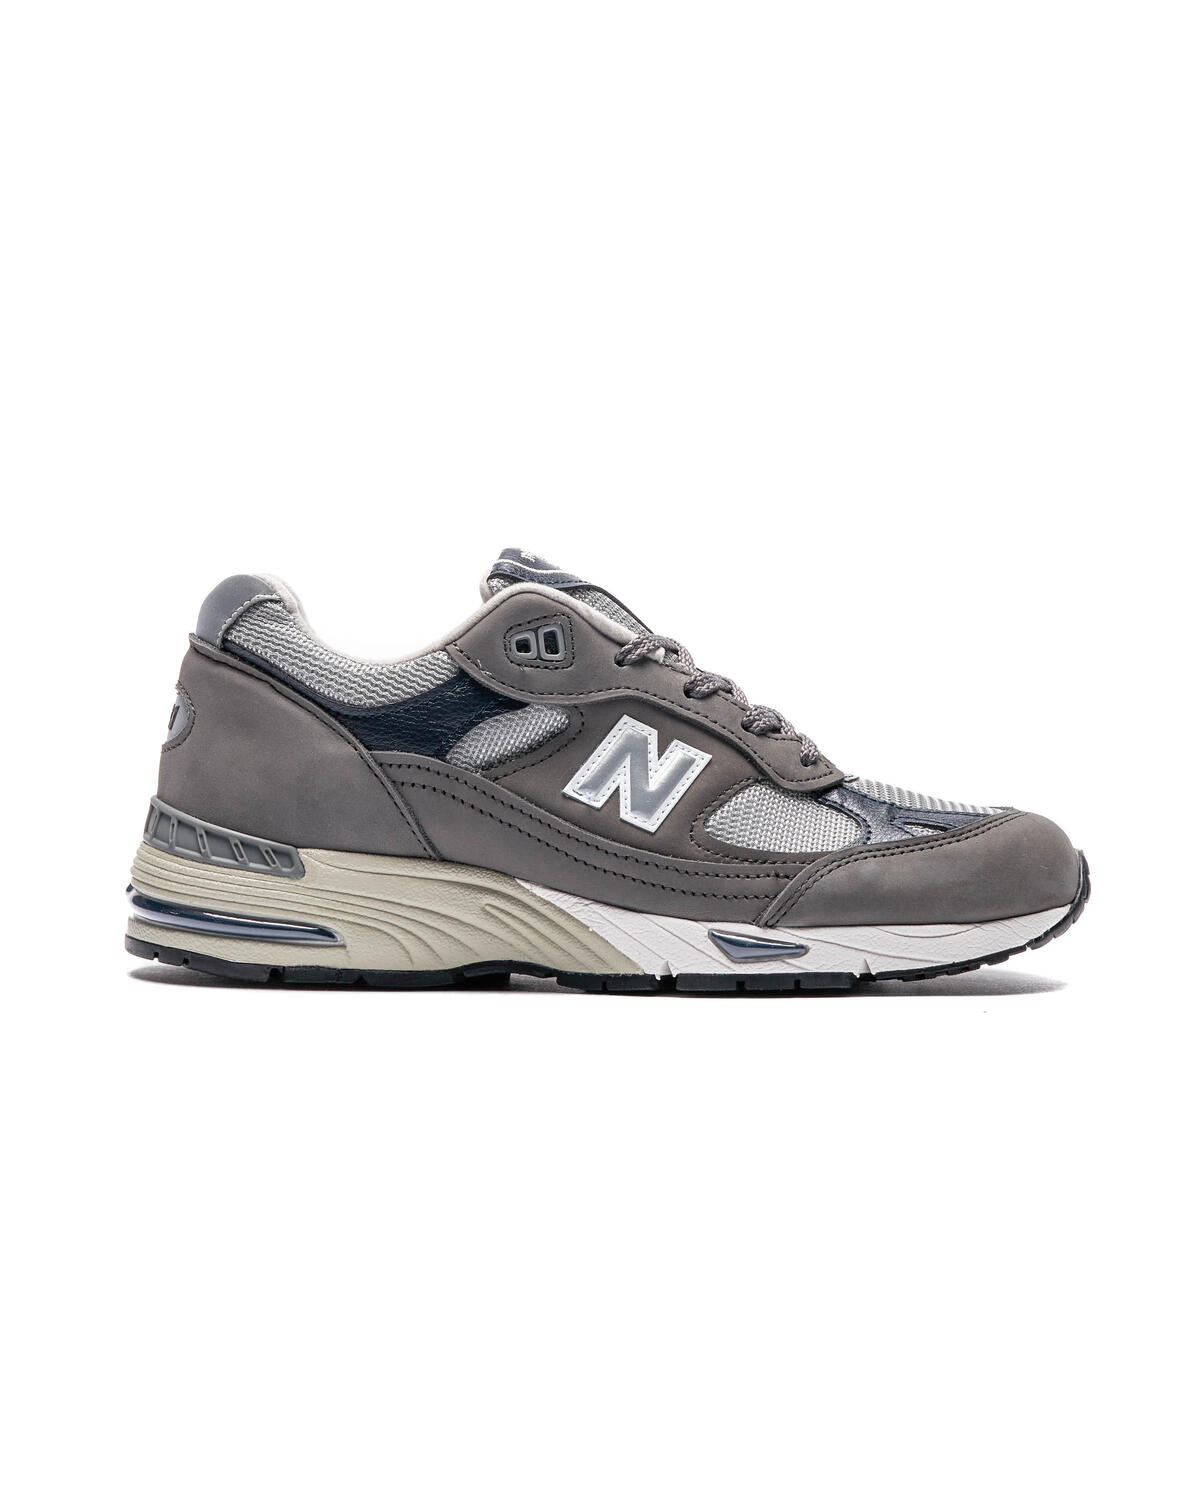 New Balance WMNS 991 GNS - Made in England | W991GNS ...